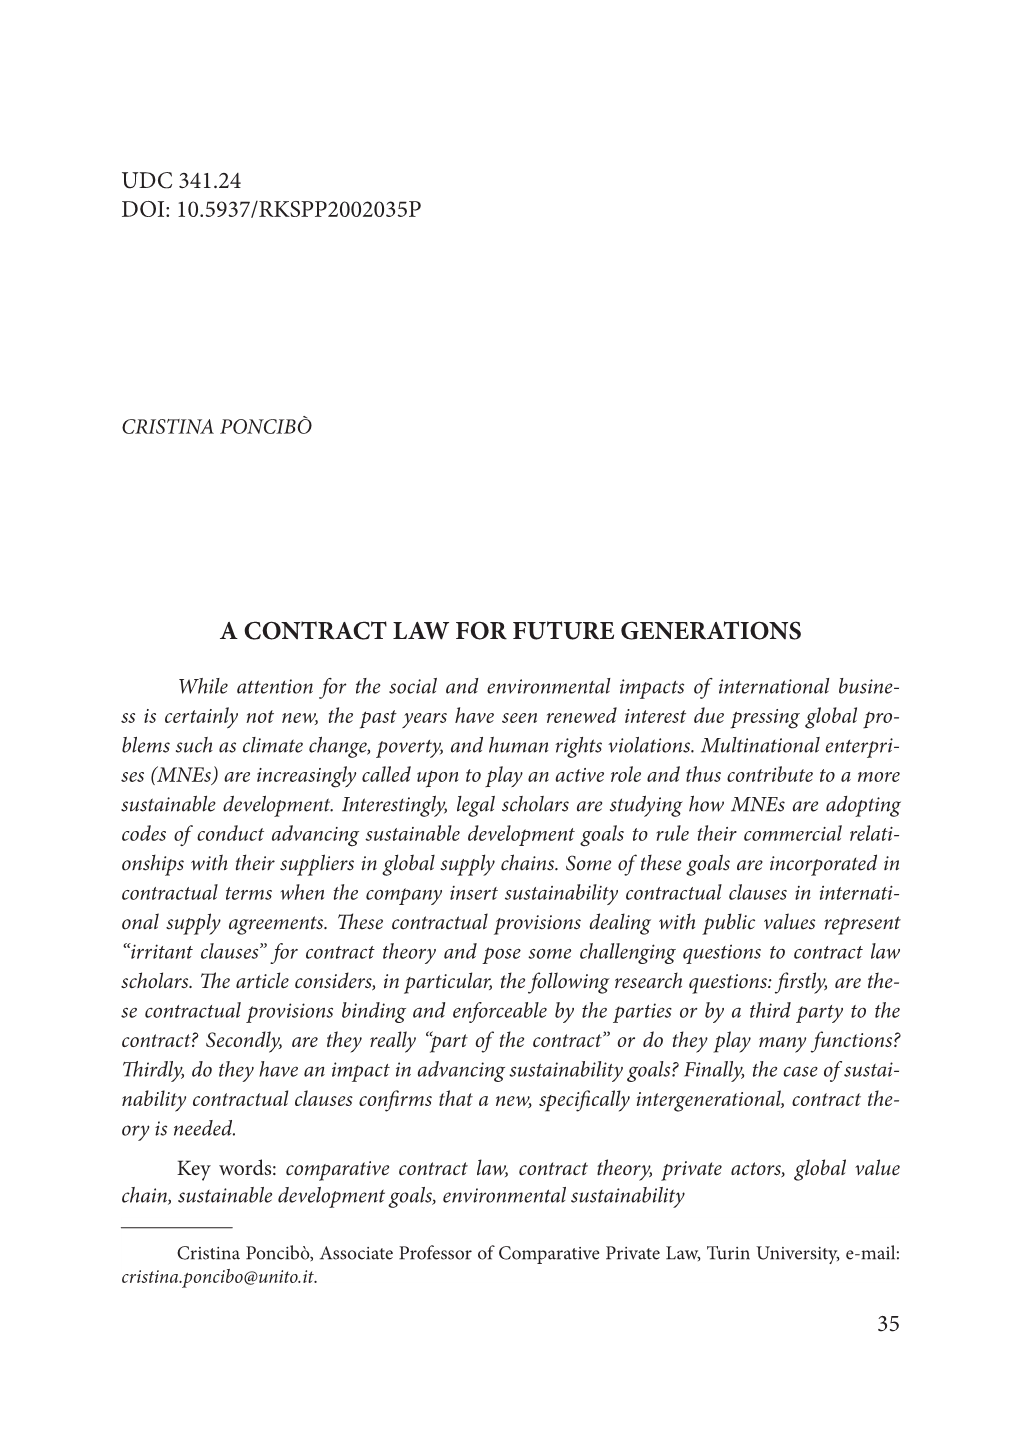 A Contract Law for Future Generations